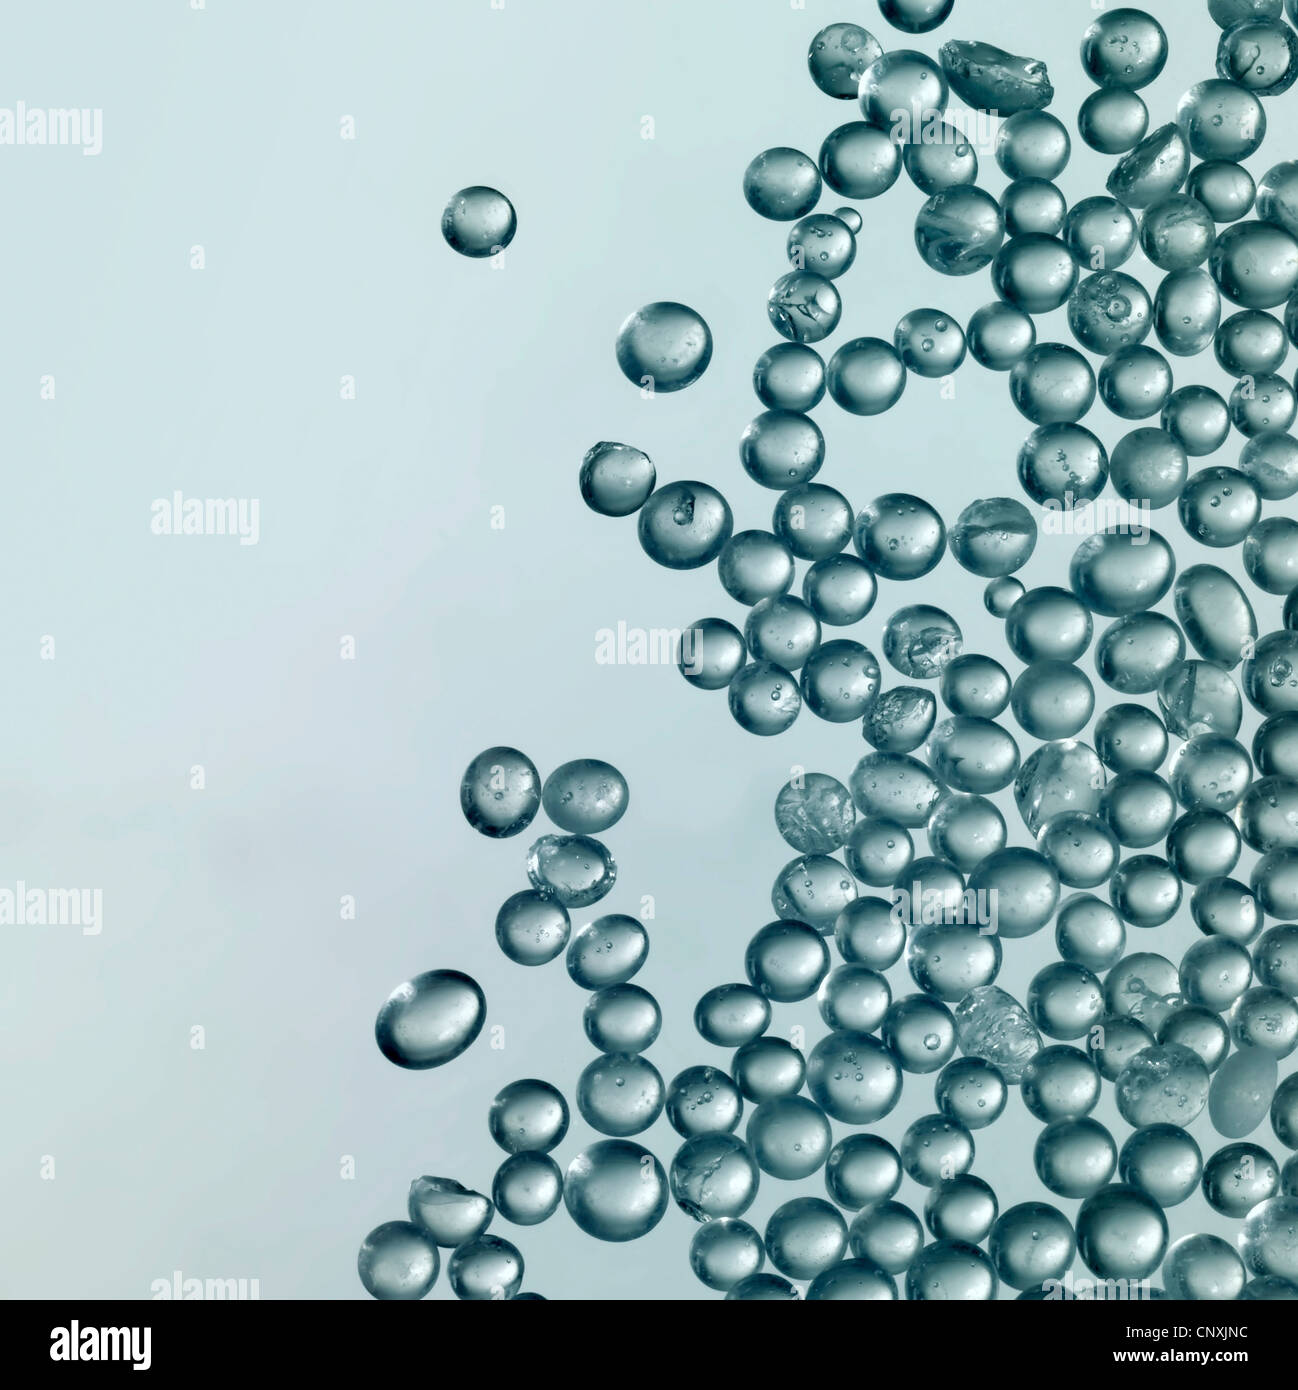 abstract science background with transparent globules in light back Stock Photo